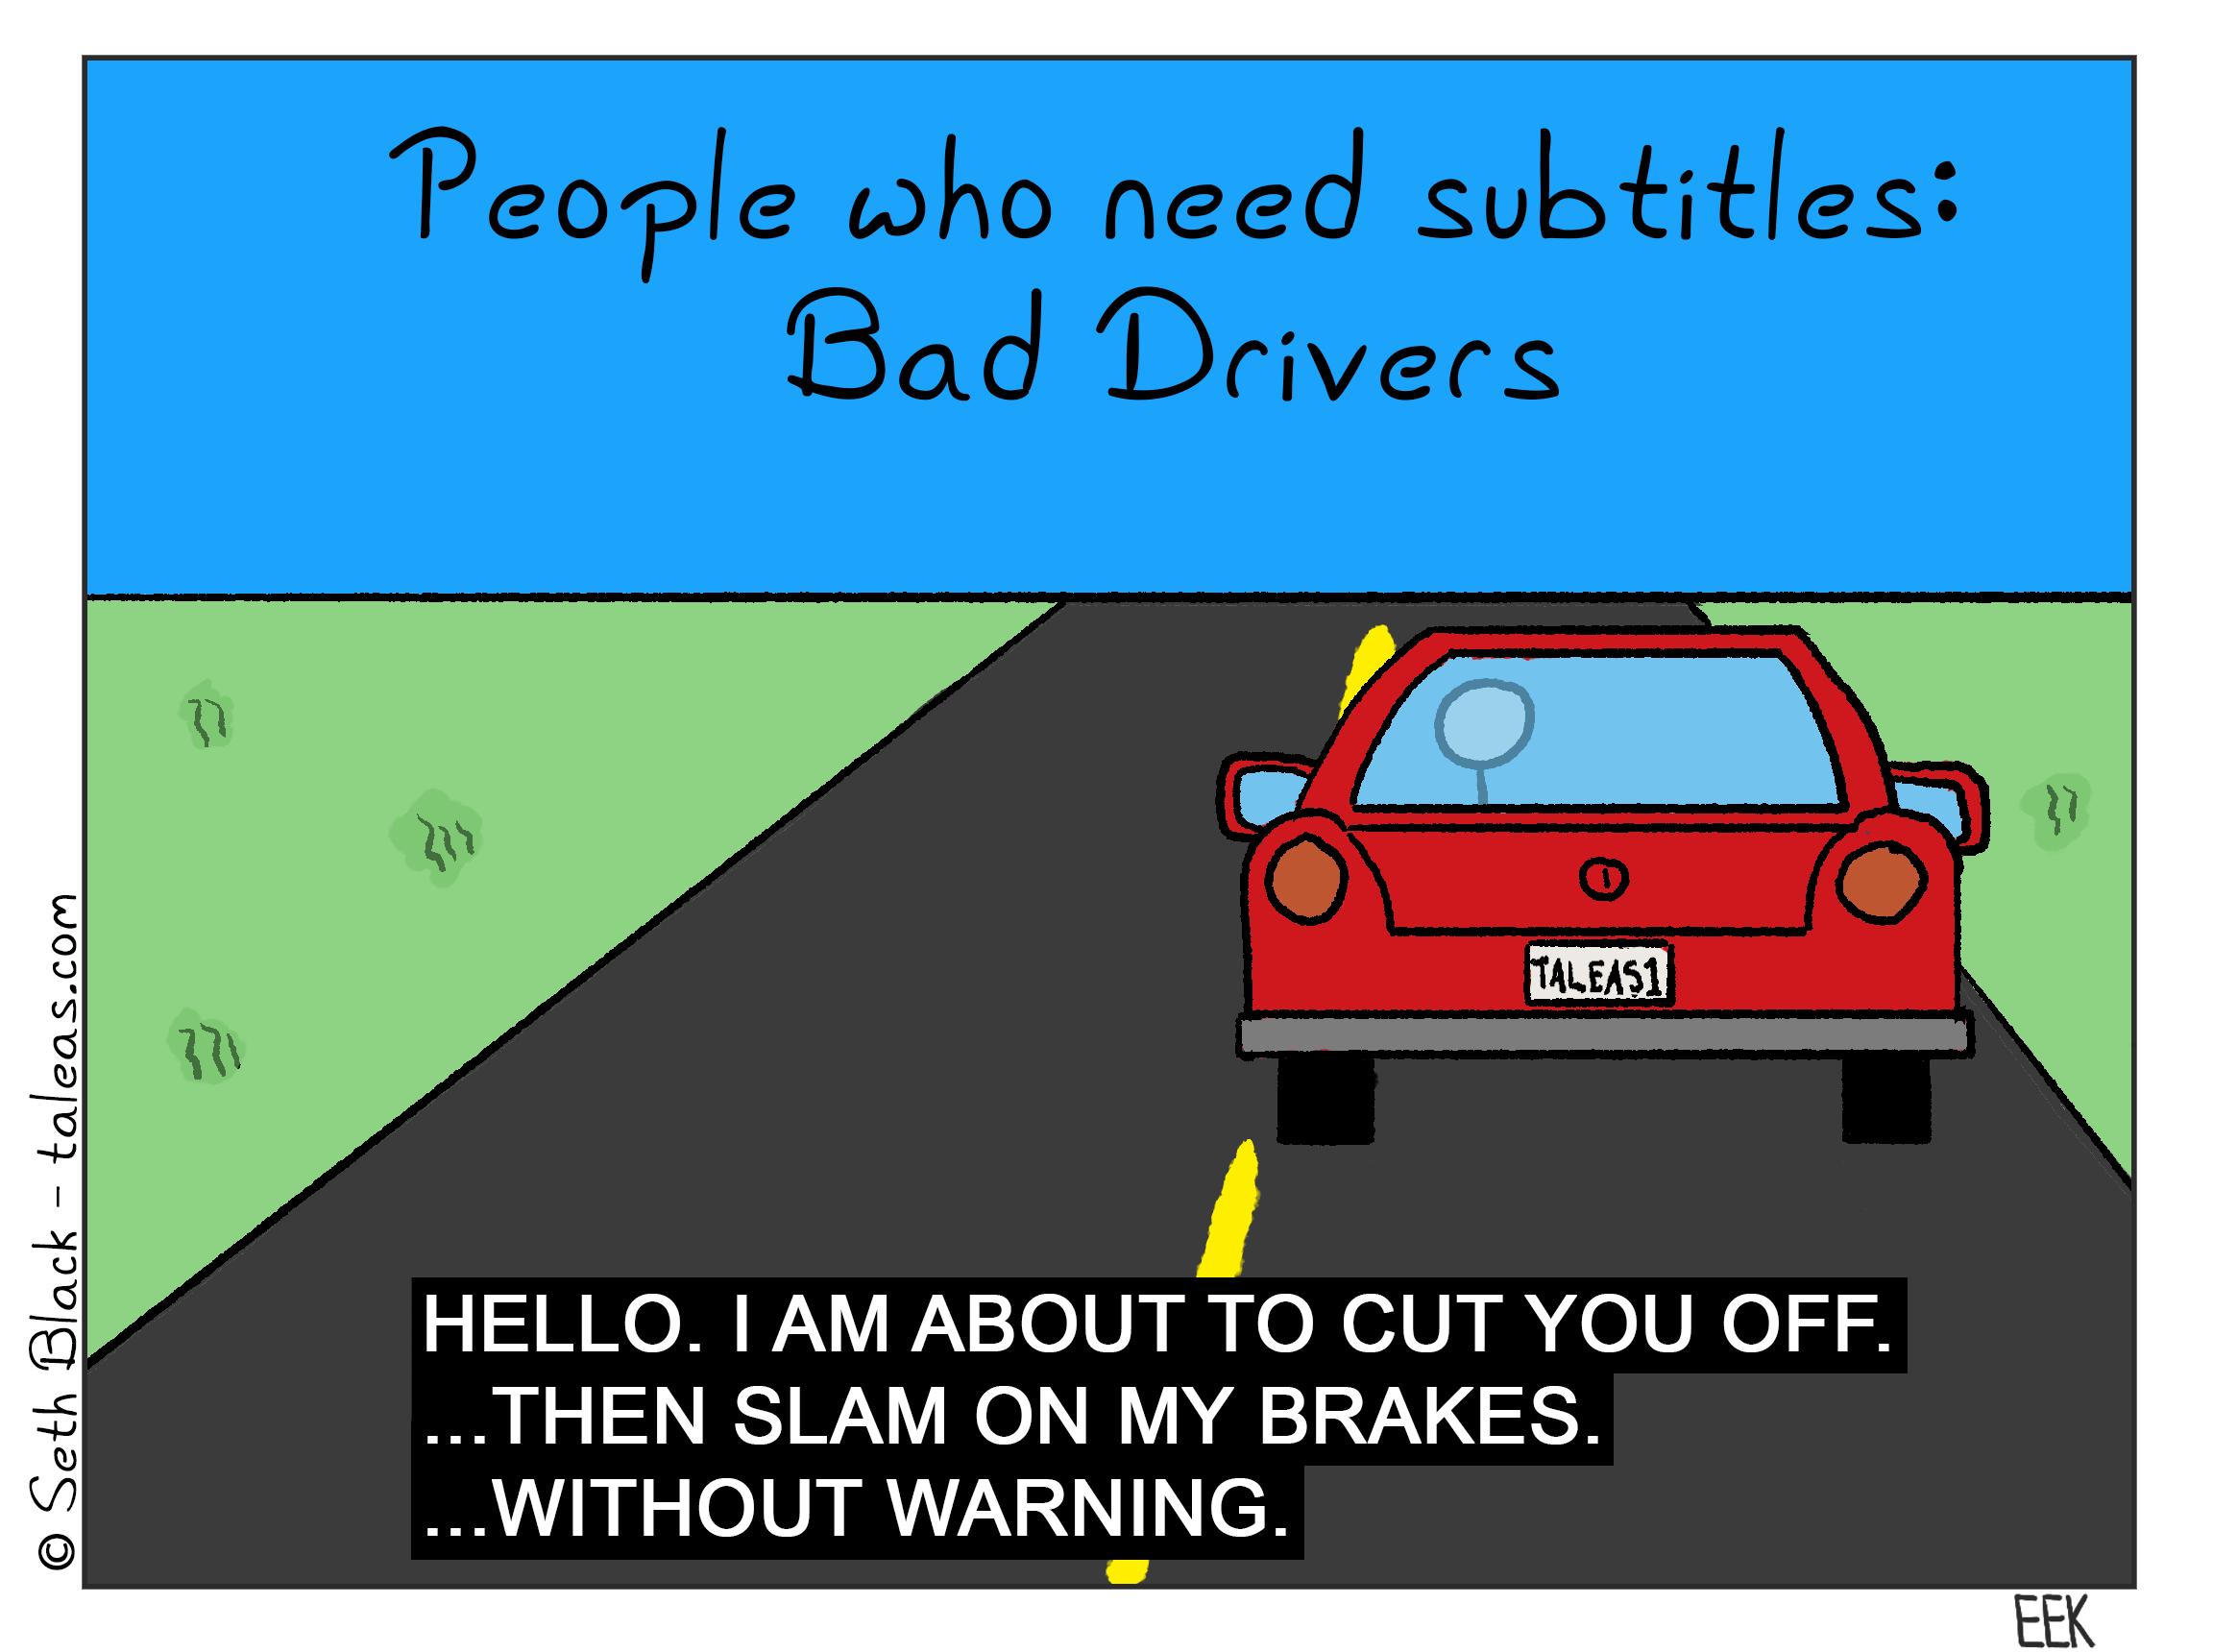 People who need subtitles: Bad Drivers. A car. Translation: "Hello, I am about to cut you off...then slam on my breaks...without warning."